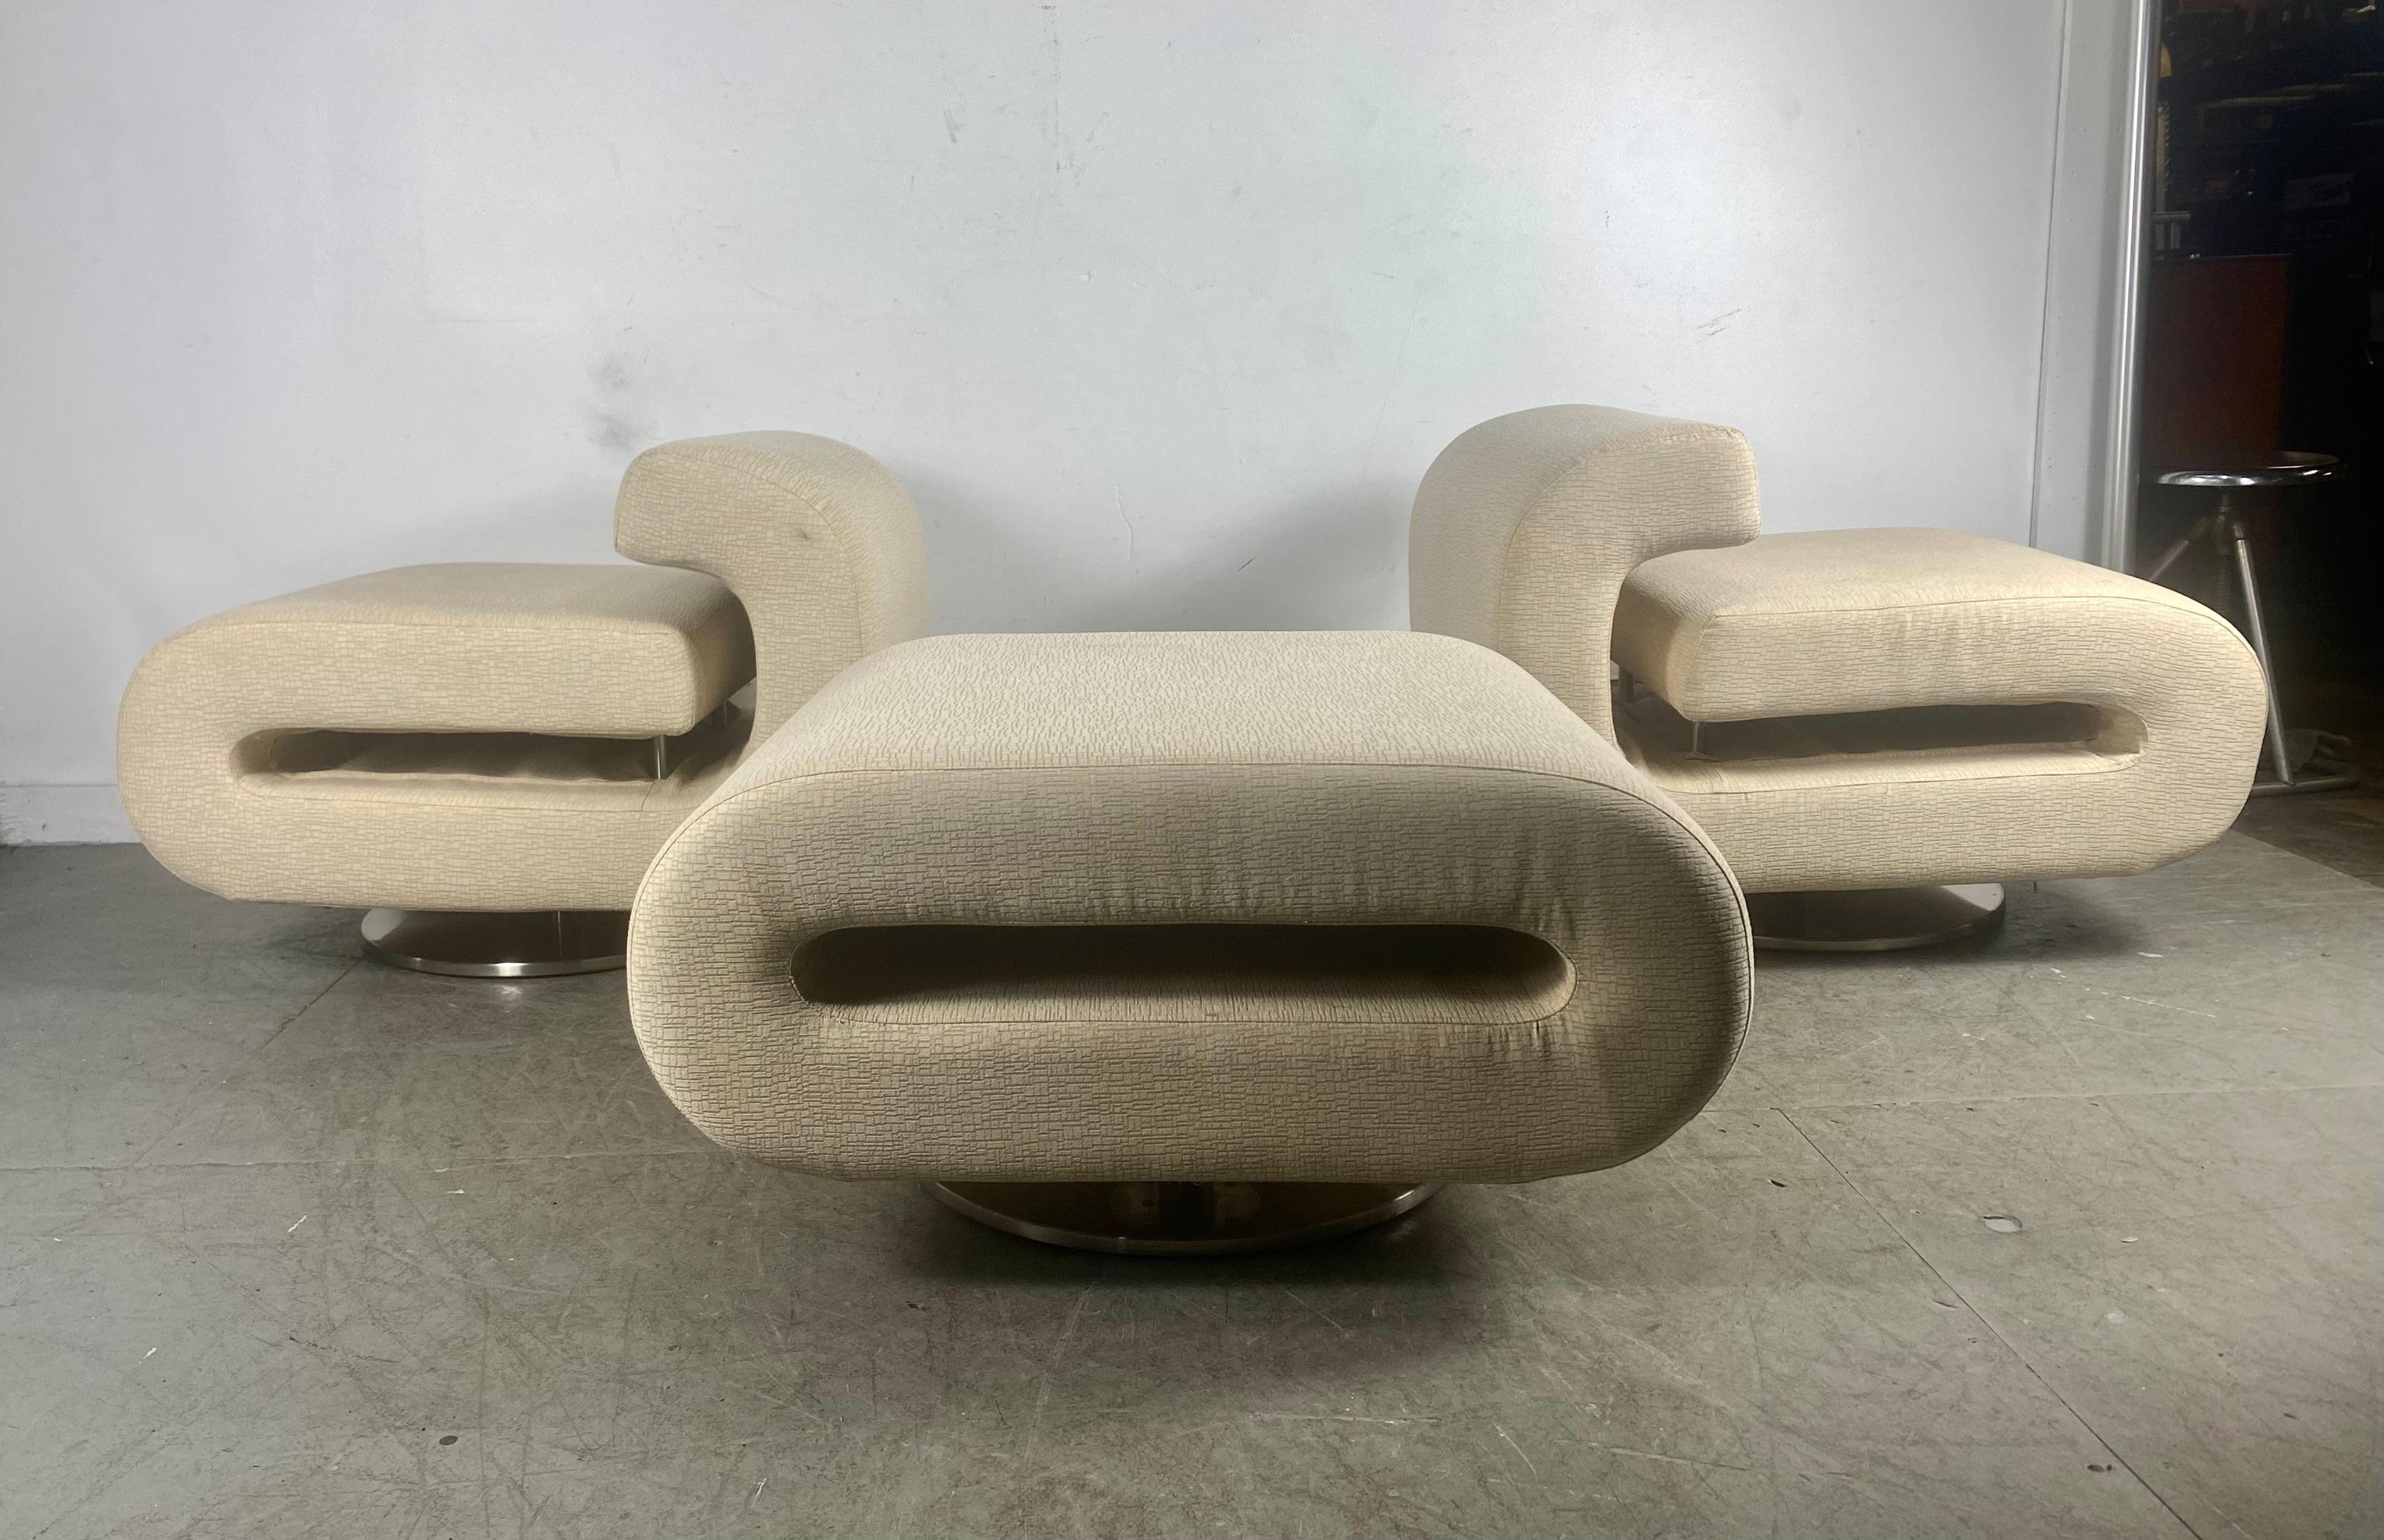 Fabric Contemporary Modernist 3-piece seating manner of Etienne Henri Martin